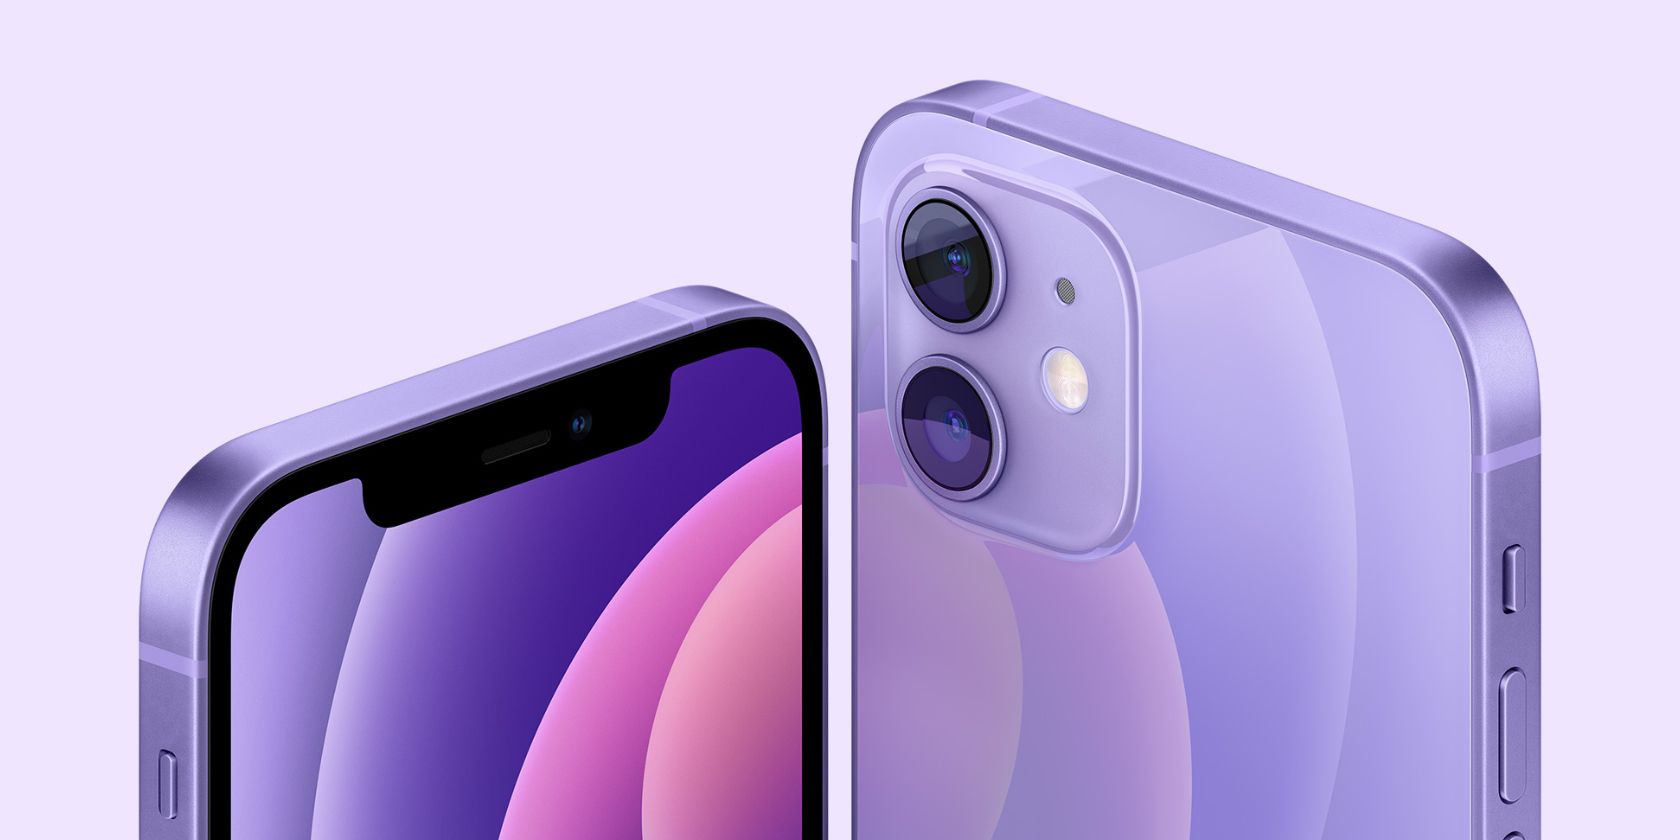 Apple's glamorous photo of the iPhone 12 and 12 Mini in the new purple color